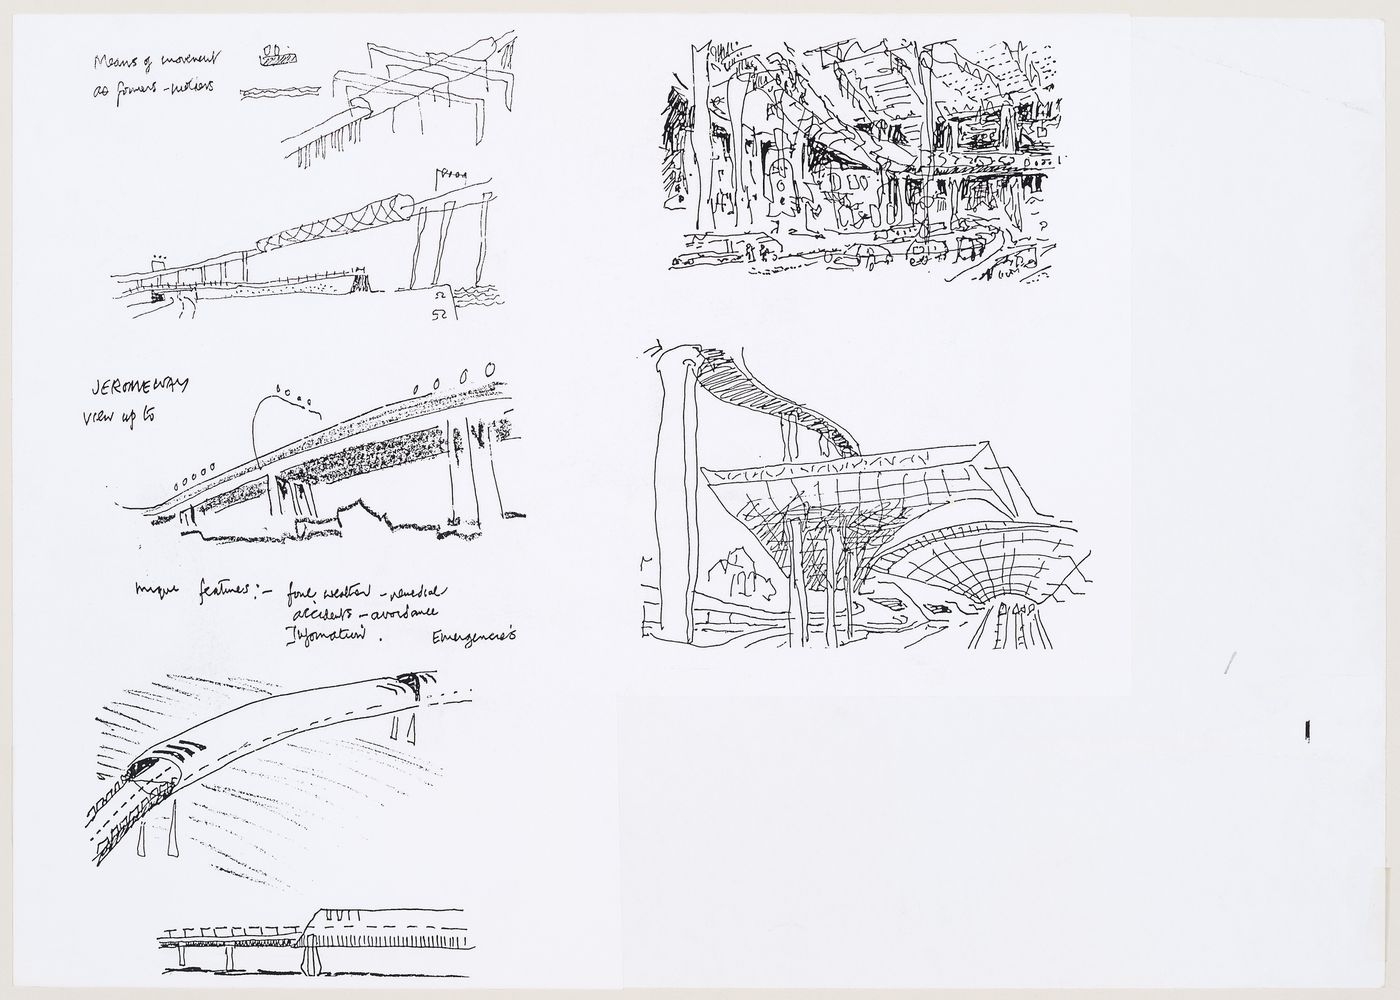 Stratton: conceptual sketches for transportation infrastructure